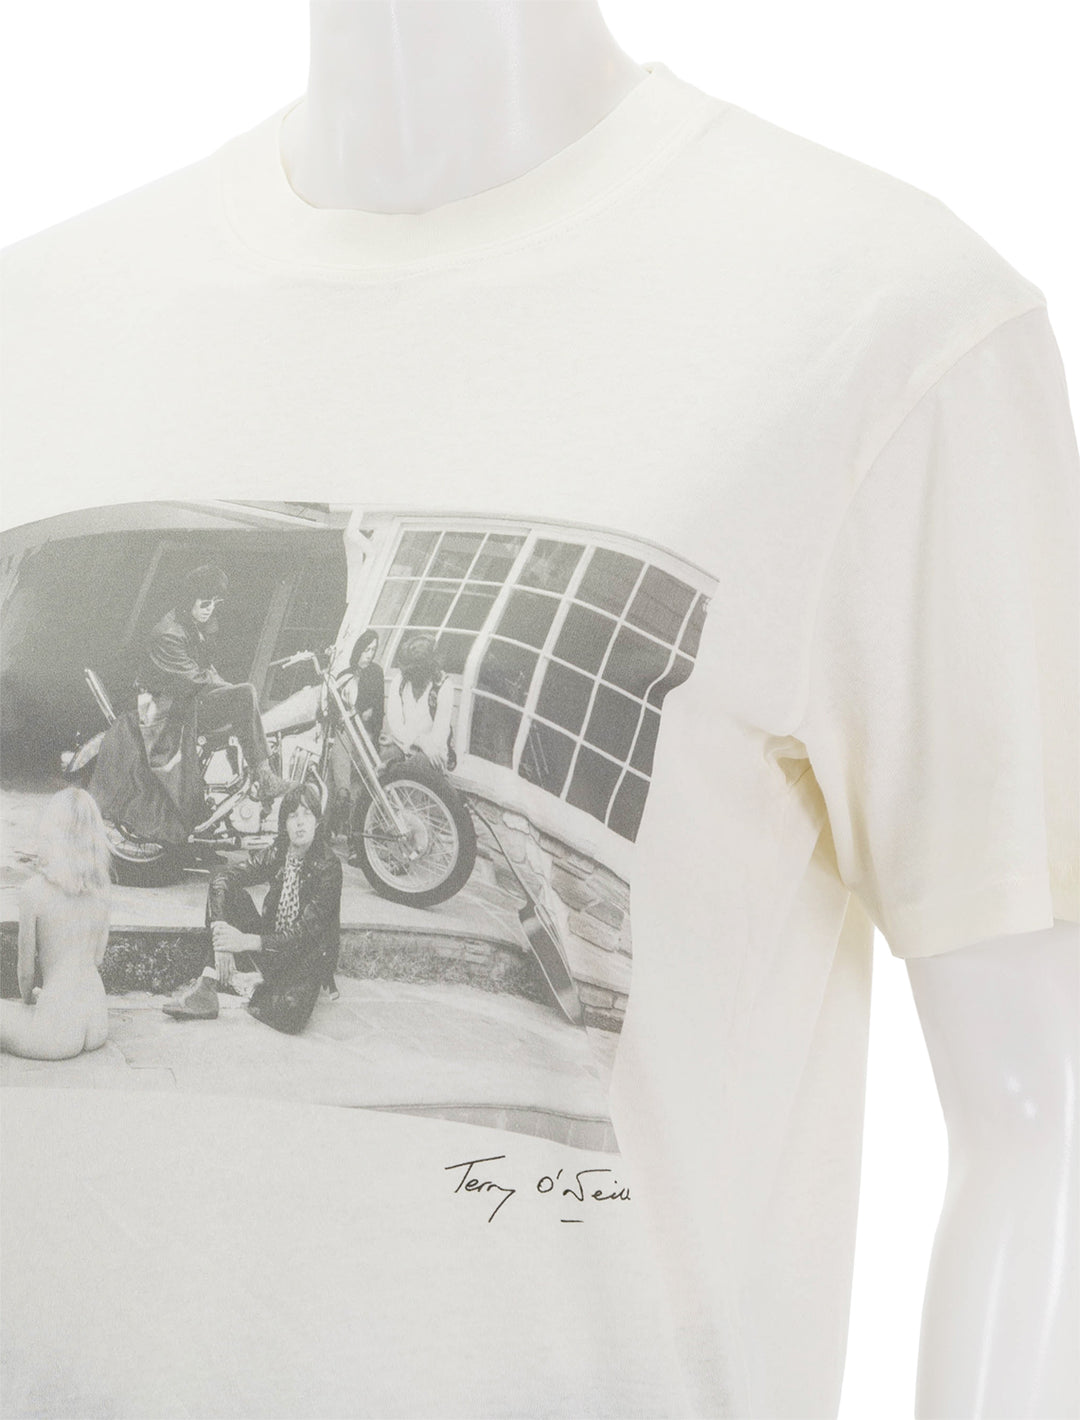 Close-up view of Anine Bing's lili tee vintage rolling stones.